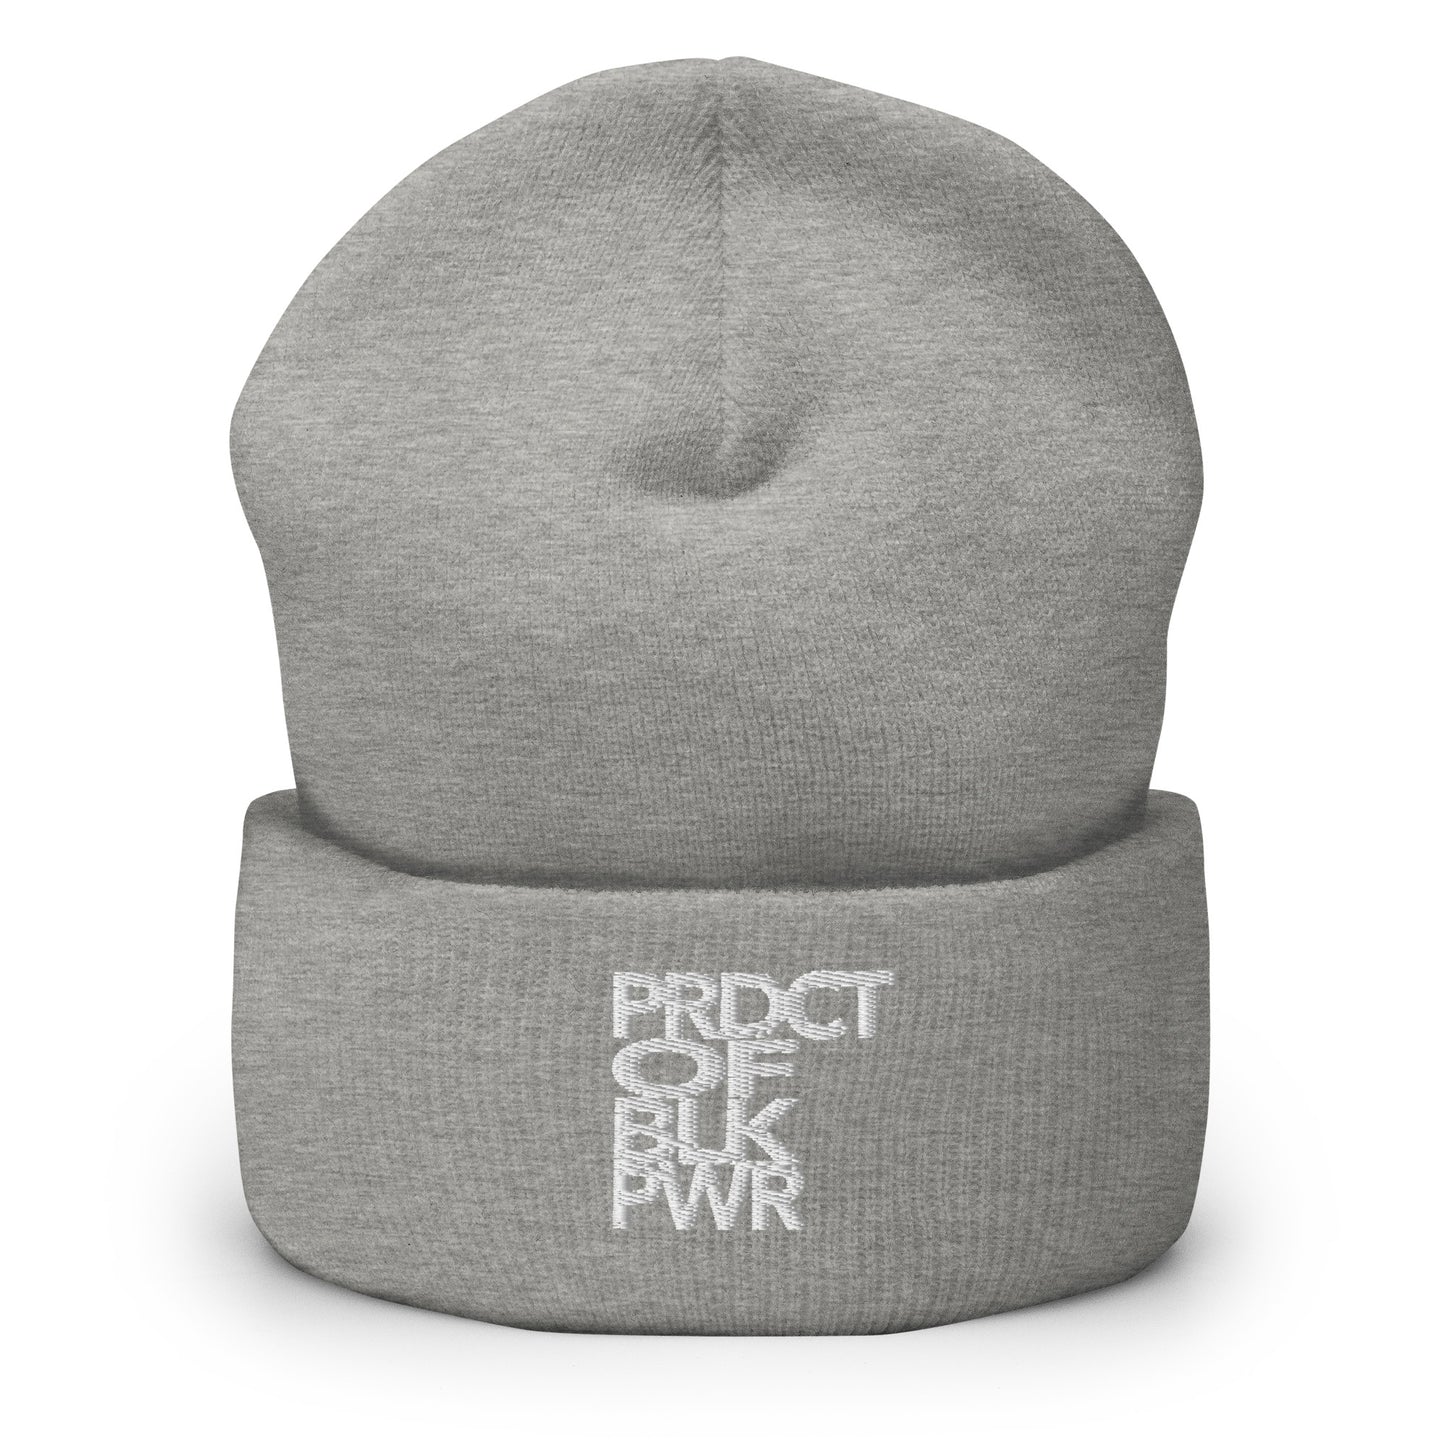 "Product of Black Power" Beanie